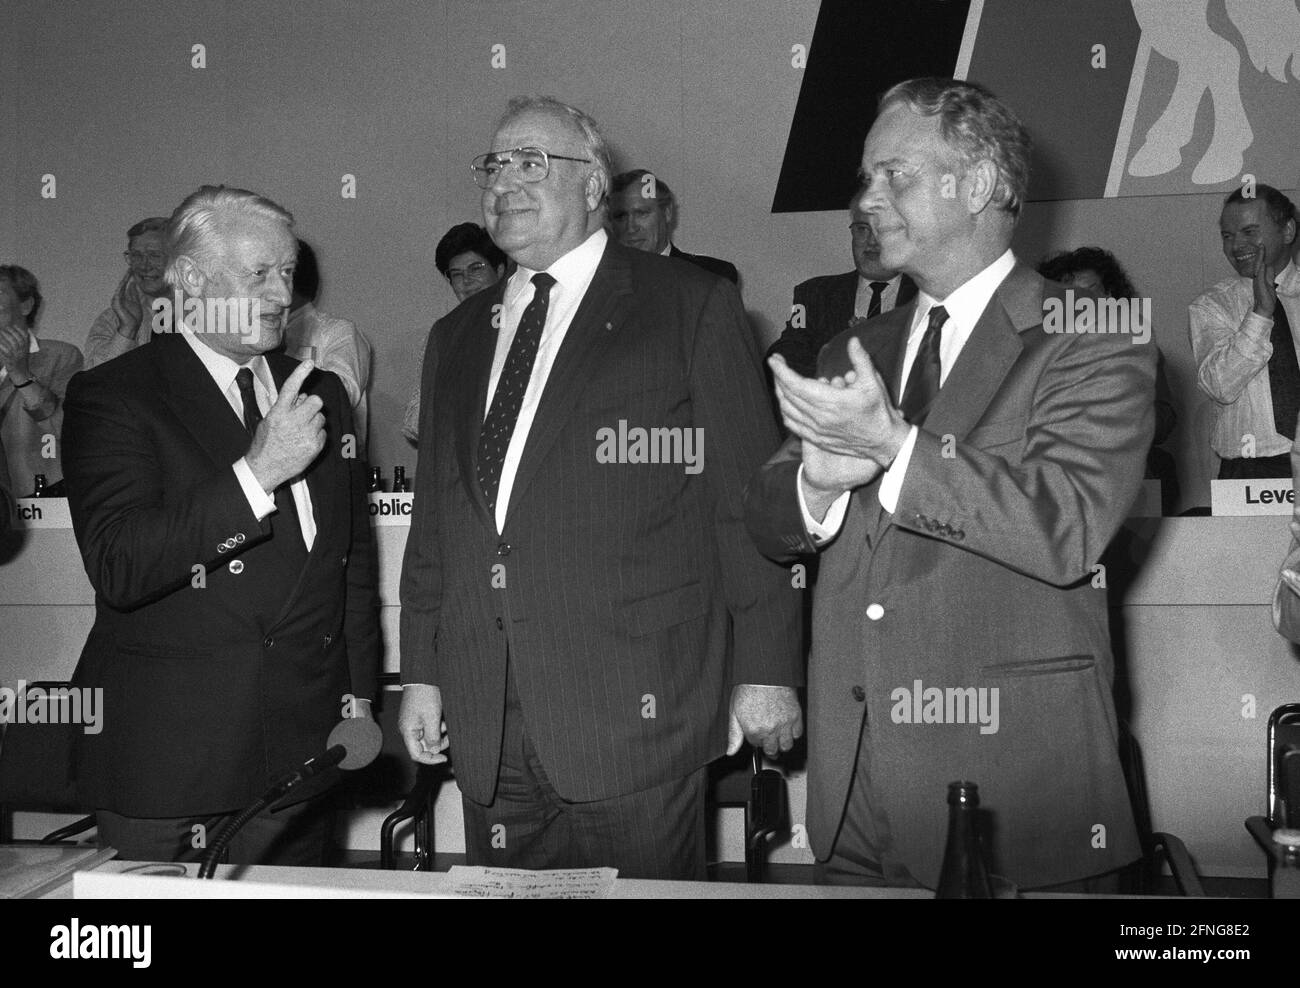 Germany, Hanover, 13.10.1989. Archive No: 09-61-19 CDU state party conference Lower Saxony Photo: CDU Federal Chairman Helmut Kohl (centre) Ernst Albrecht (right), Minister President of Lower Saxony and Wilfried Hasselmann, State Chairman of the CDU [automated translation] Stock Photo